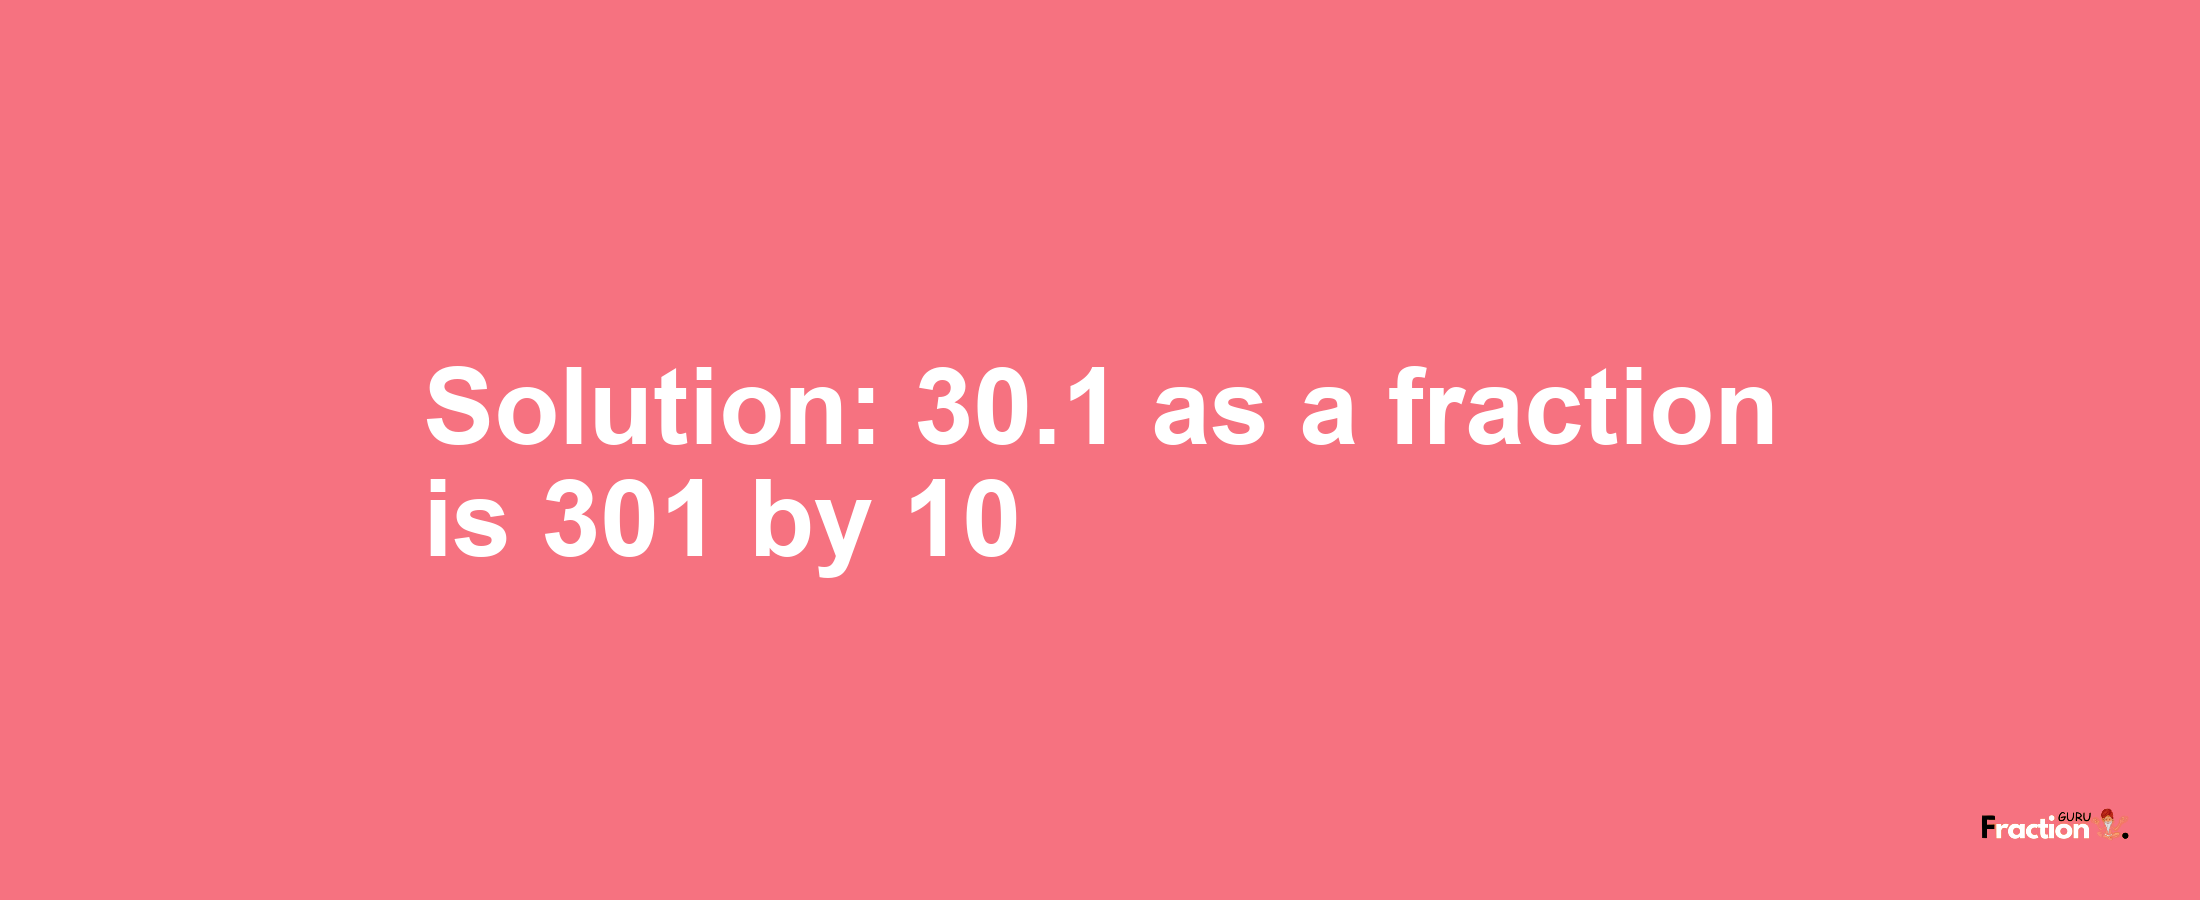 Solution:30.1 as a fraction is 301/10